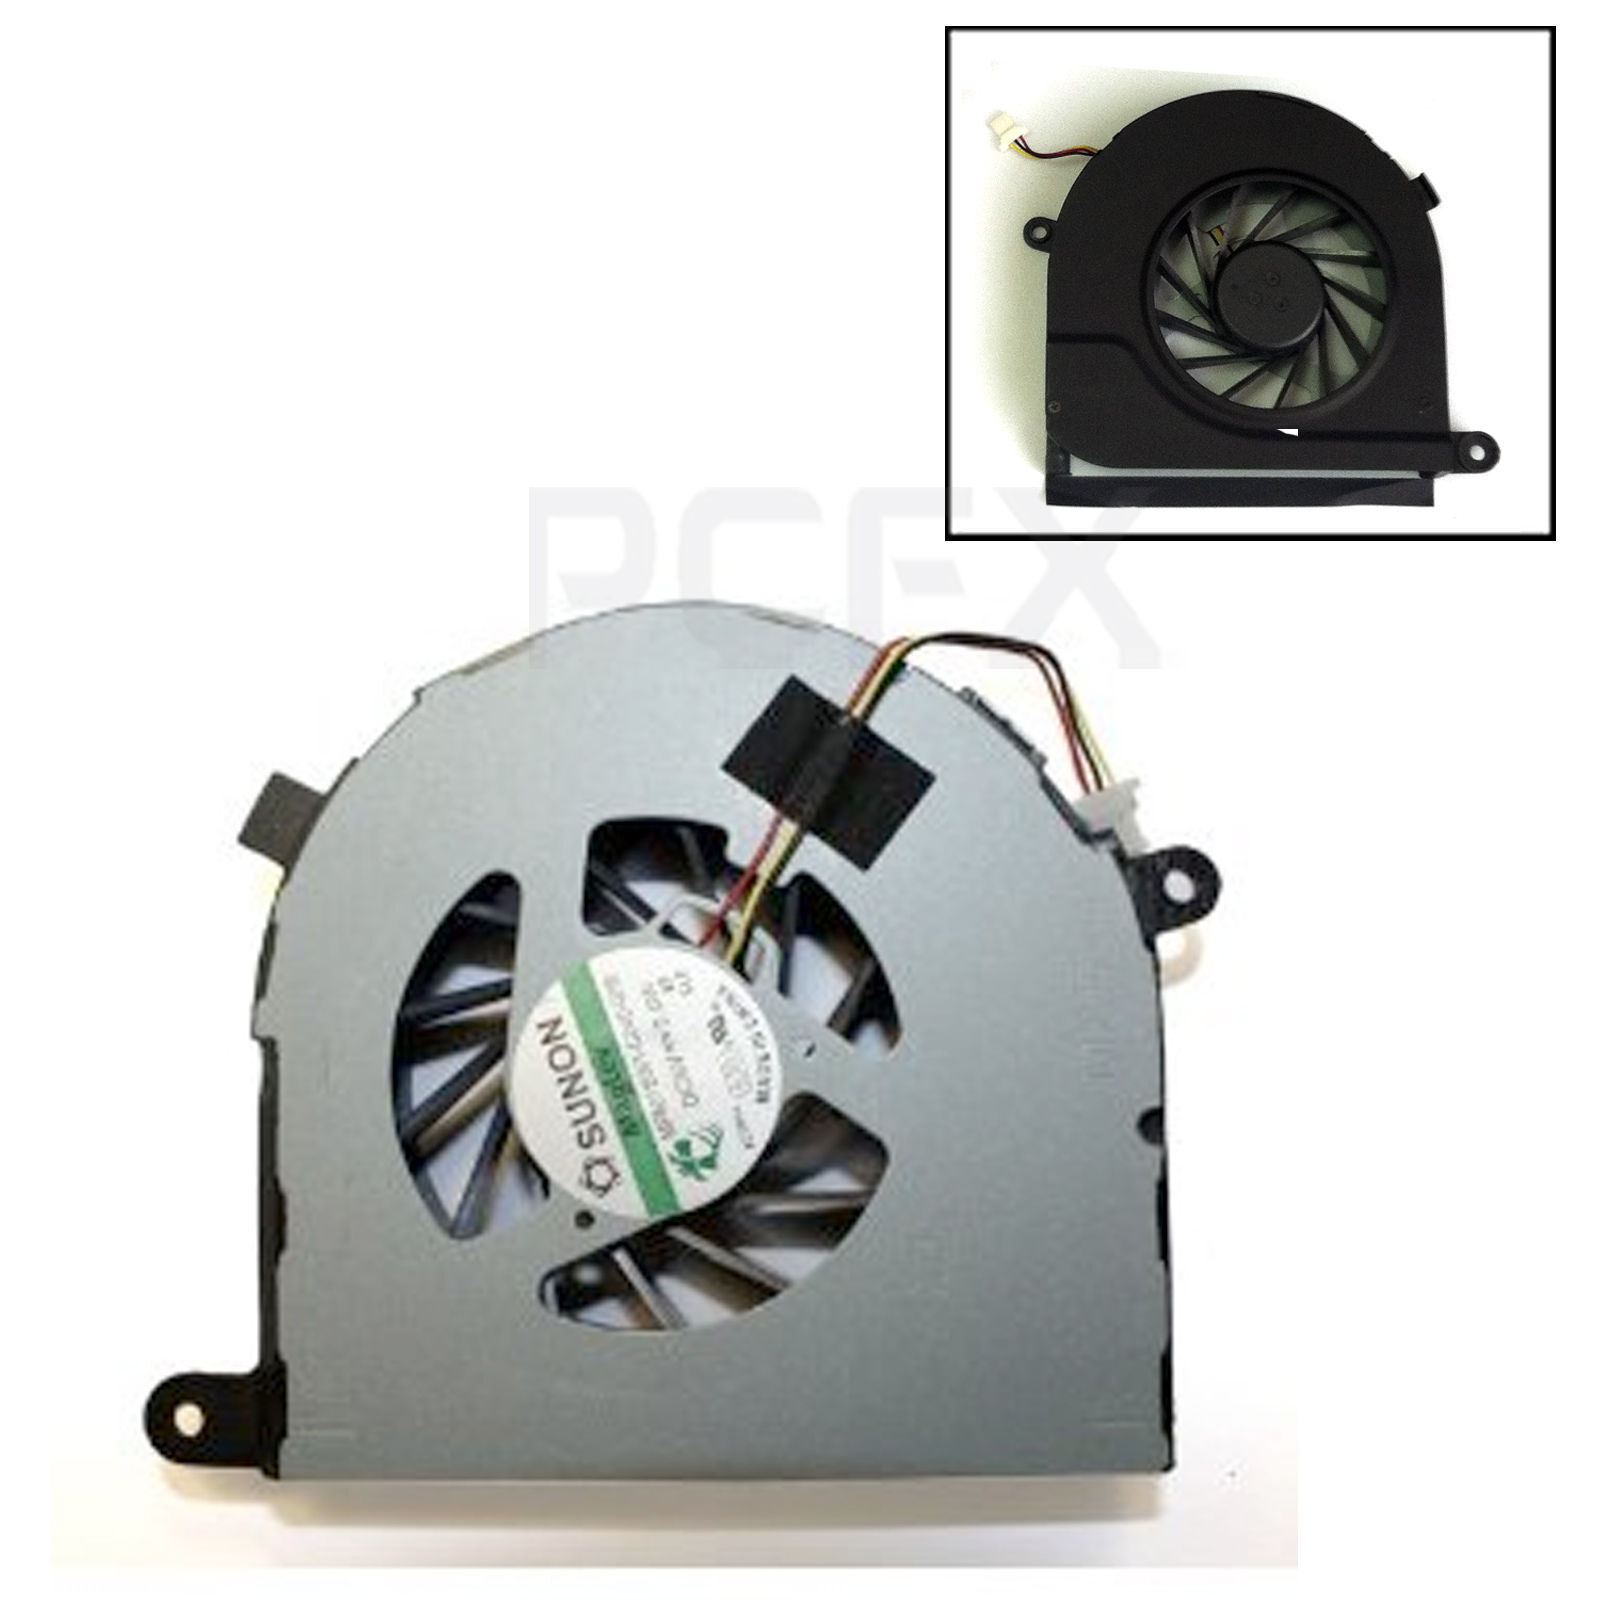 New CPU Fan for Dell Inspiron 17R N7110 Laptop (3-PIN) MF60120V1-C130-G99 064C85